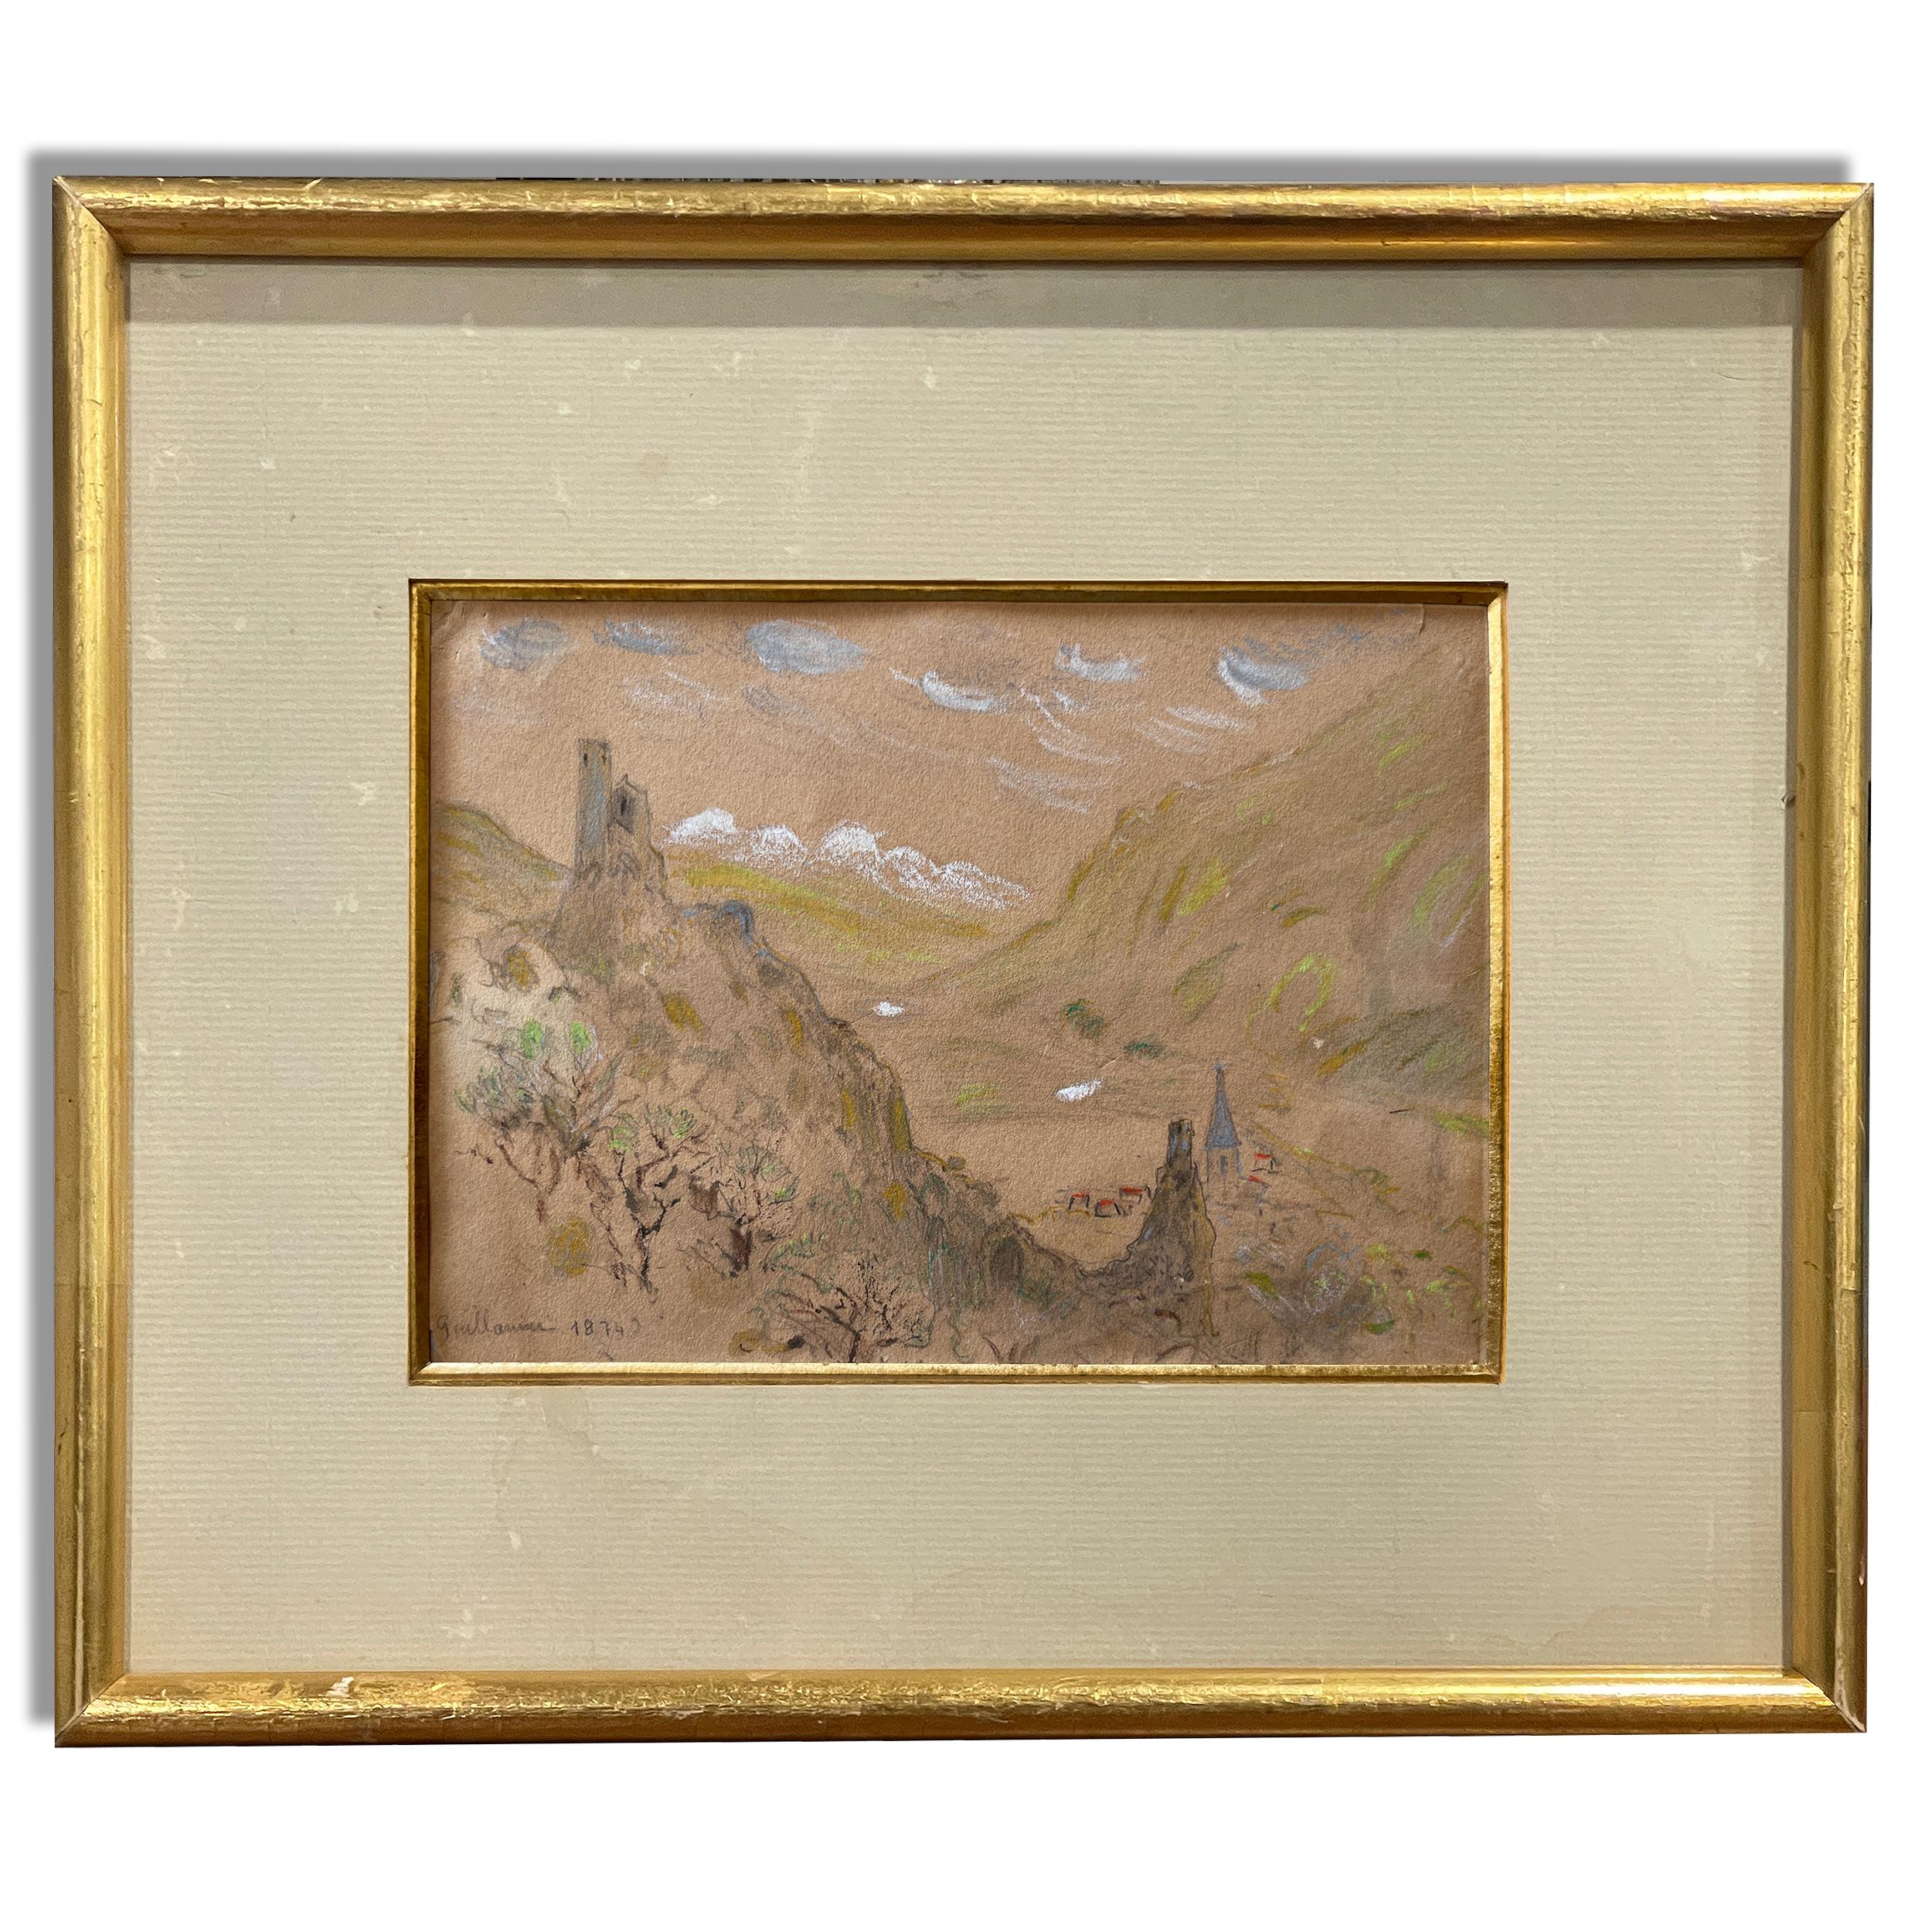 Jean-Baptiste Armand GUILLAUMIN (1841-1927)
Drawing, watercolor and charcoal pencil depicting a mountain view in France.
Titled on one old tag on the backside “Ruines du chateau a Crozant” (Crozant’s castle ruins).
Signed bottom left and dated